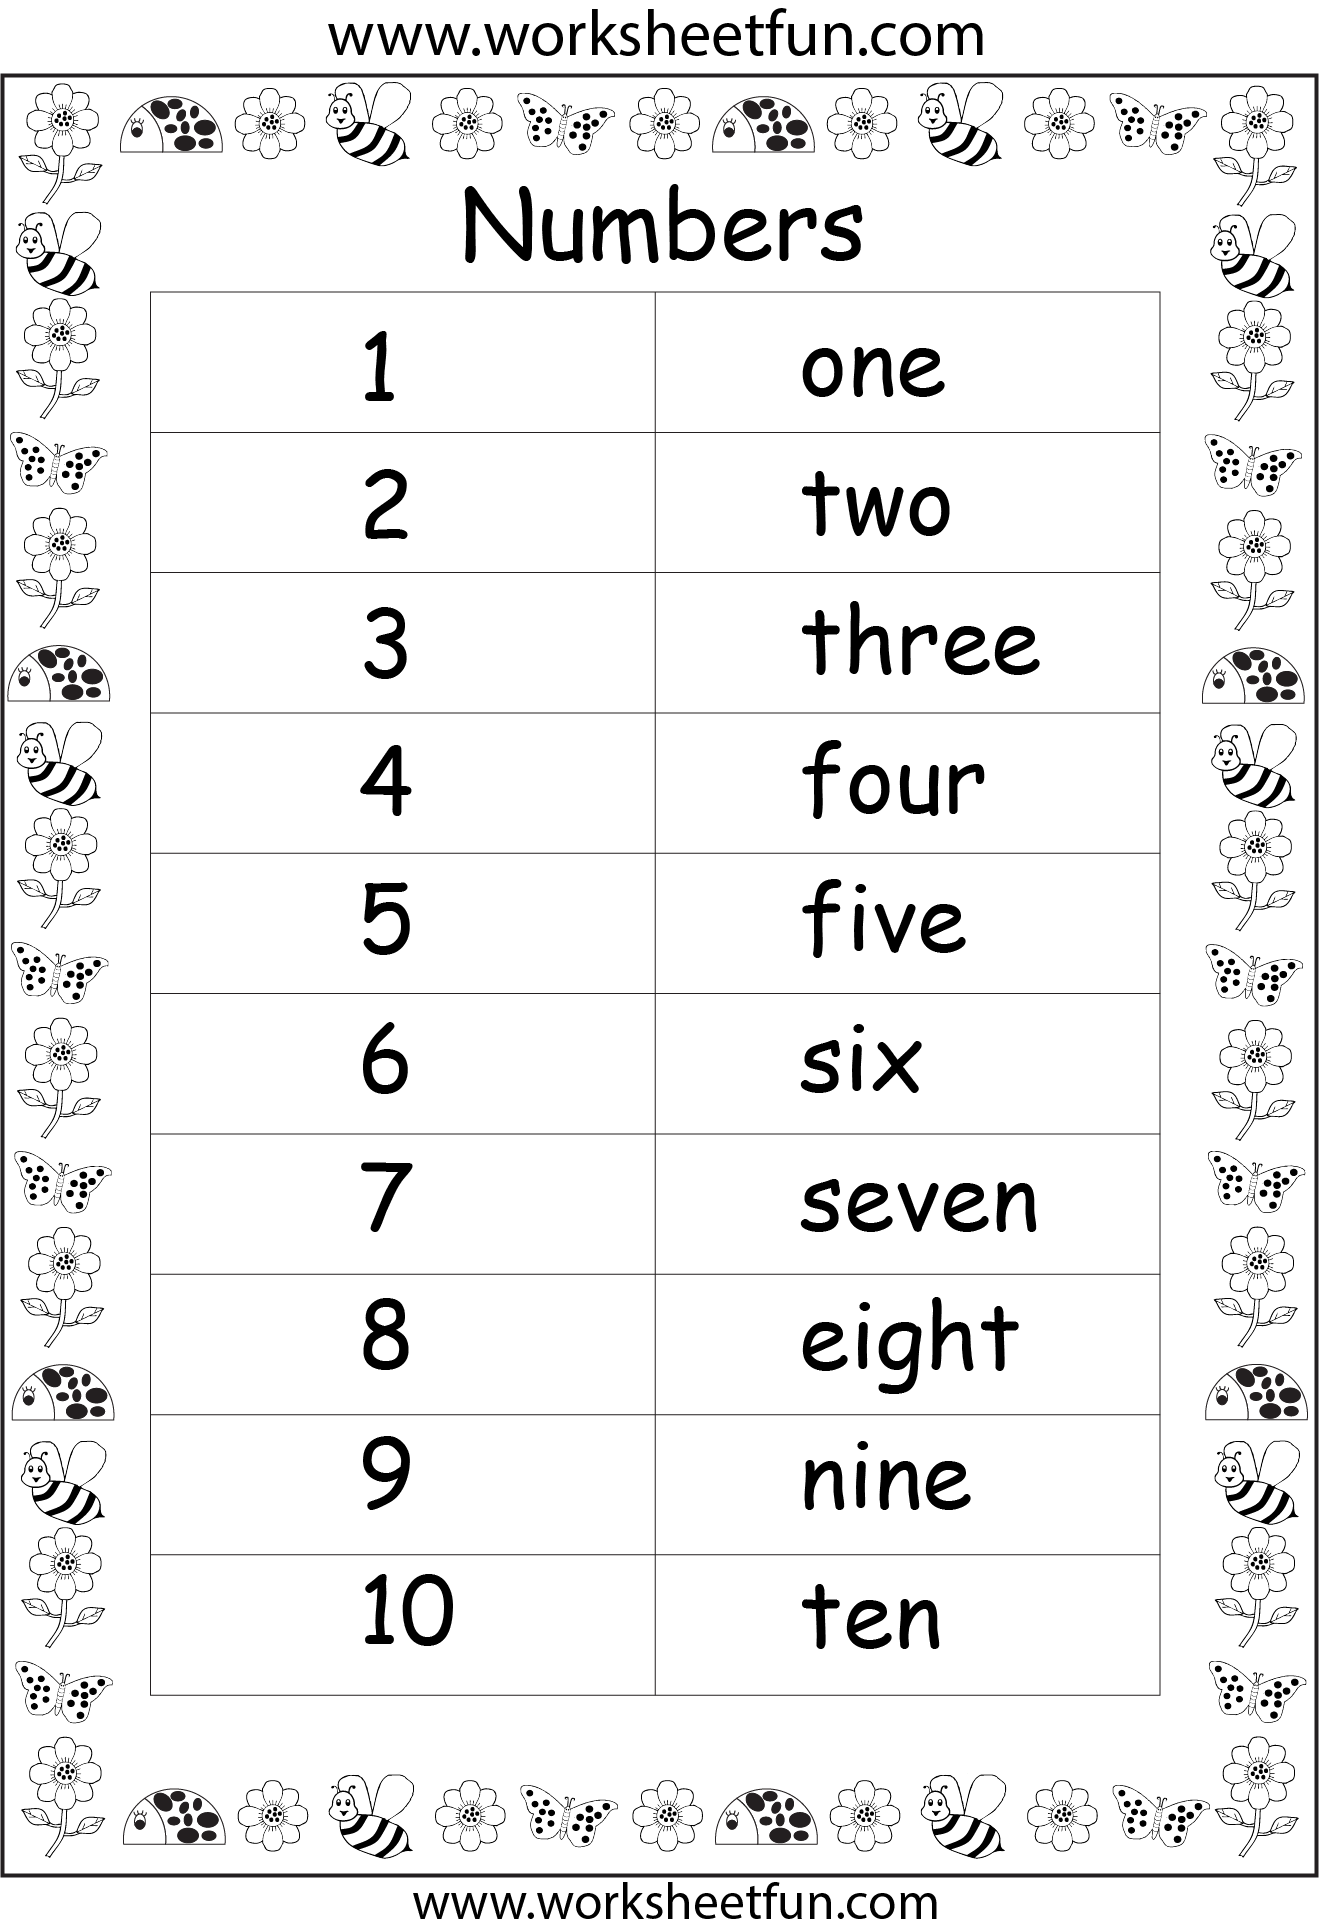 numbers-with-words-printable